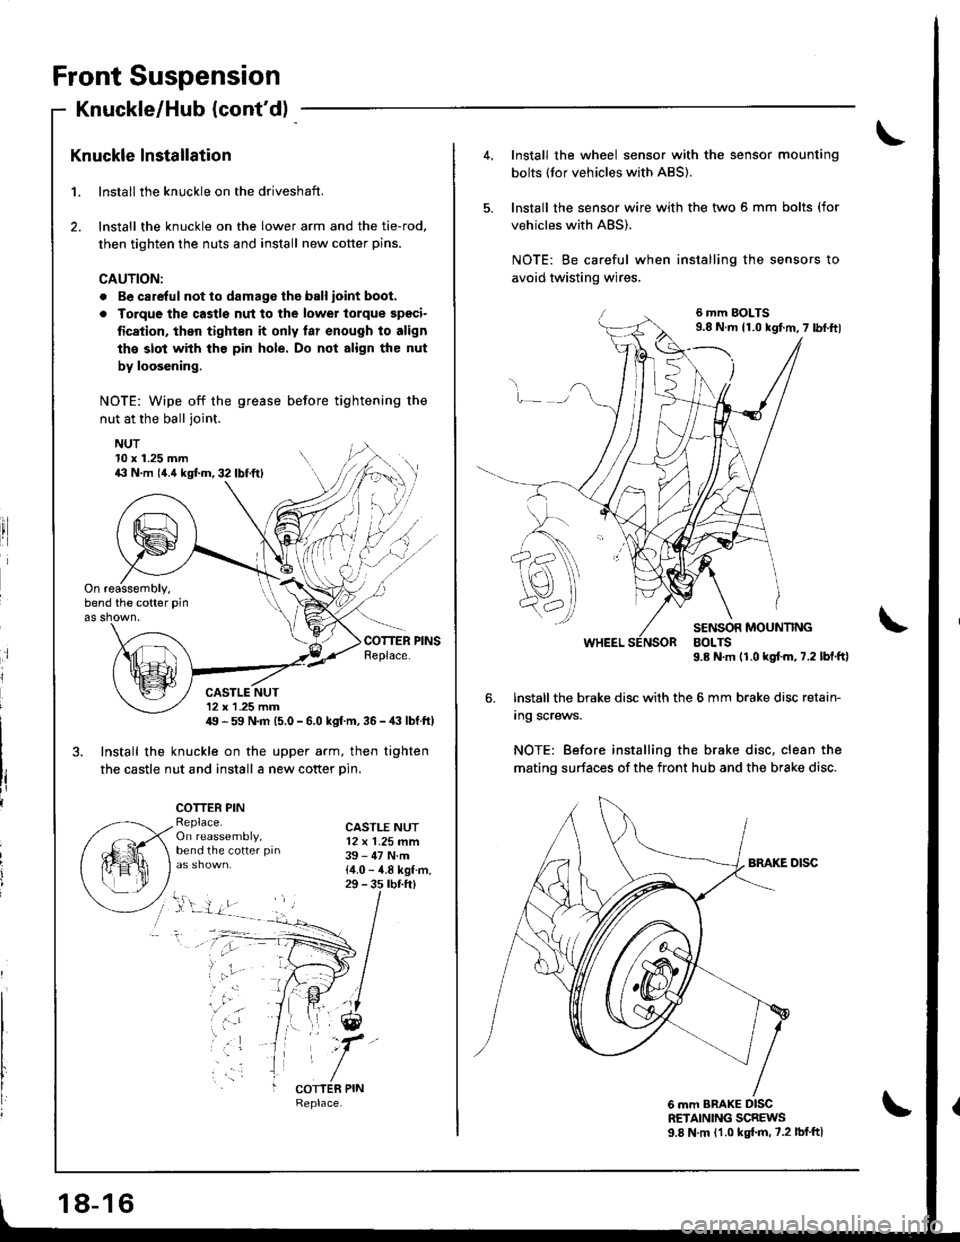 HONDA INTEGRA 1998 4.G User Guide Front Suspension
Knuckle/Hub (contd)
Knuckle lnstallation
1. lnstall the knuckle on the driveshaft.
2. lnstall the knuckle on the lower arm and the tie-rod,
then tighten the nuts and install new cott